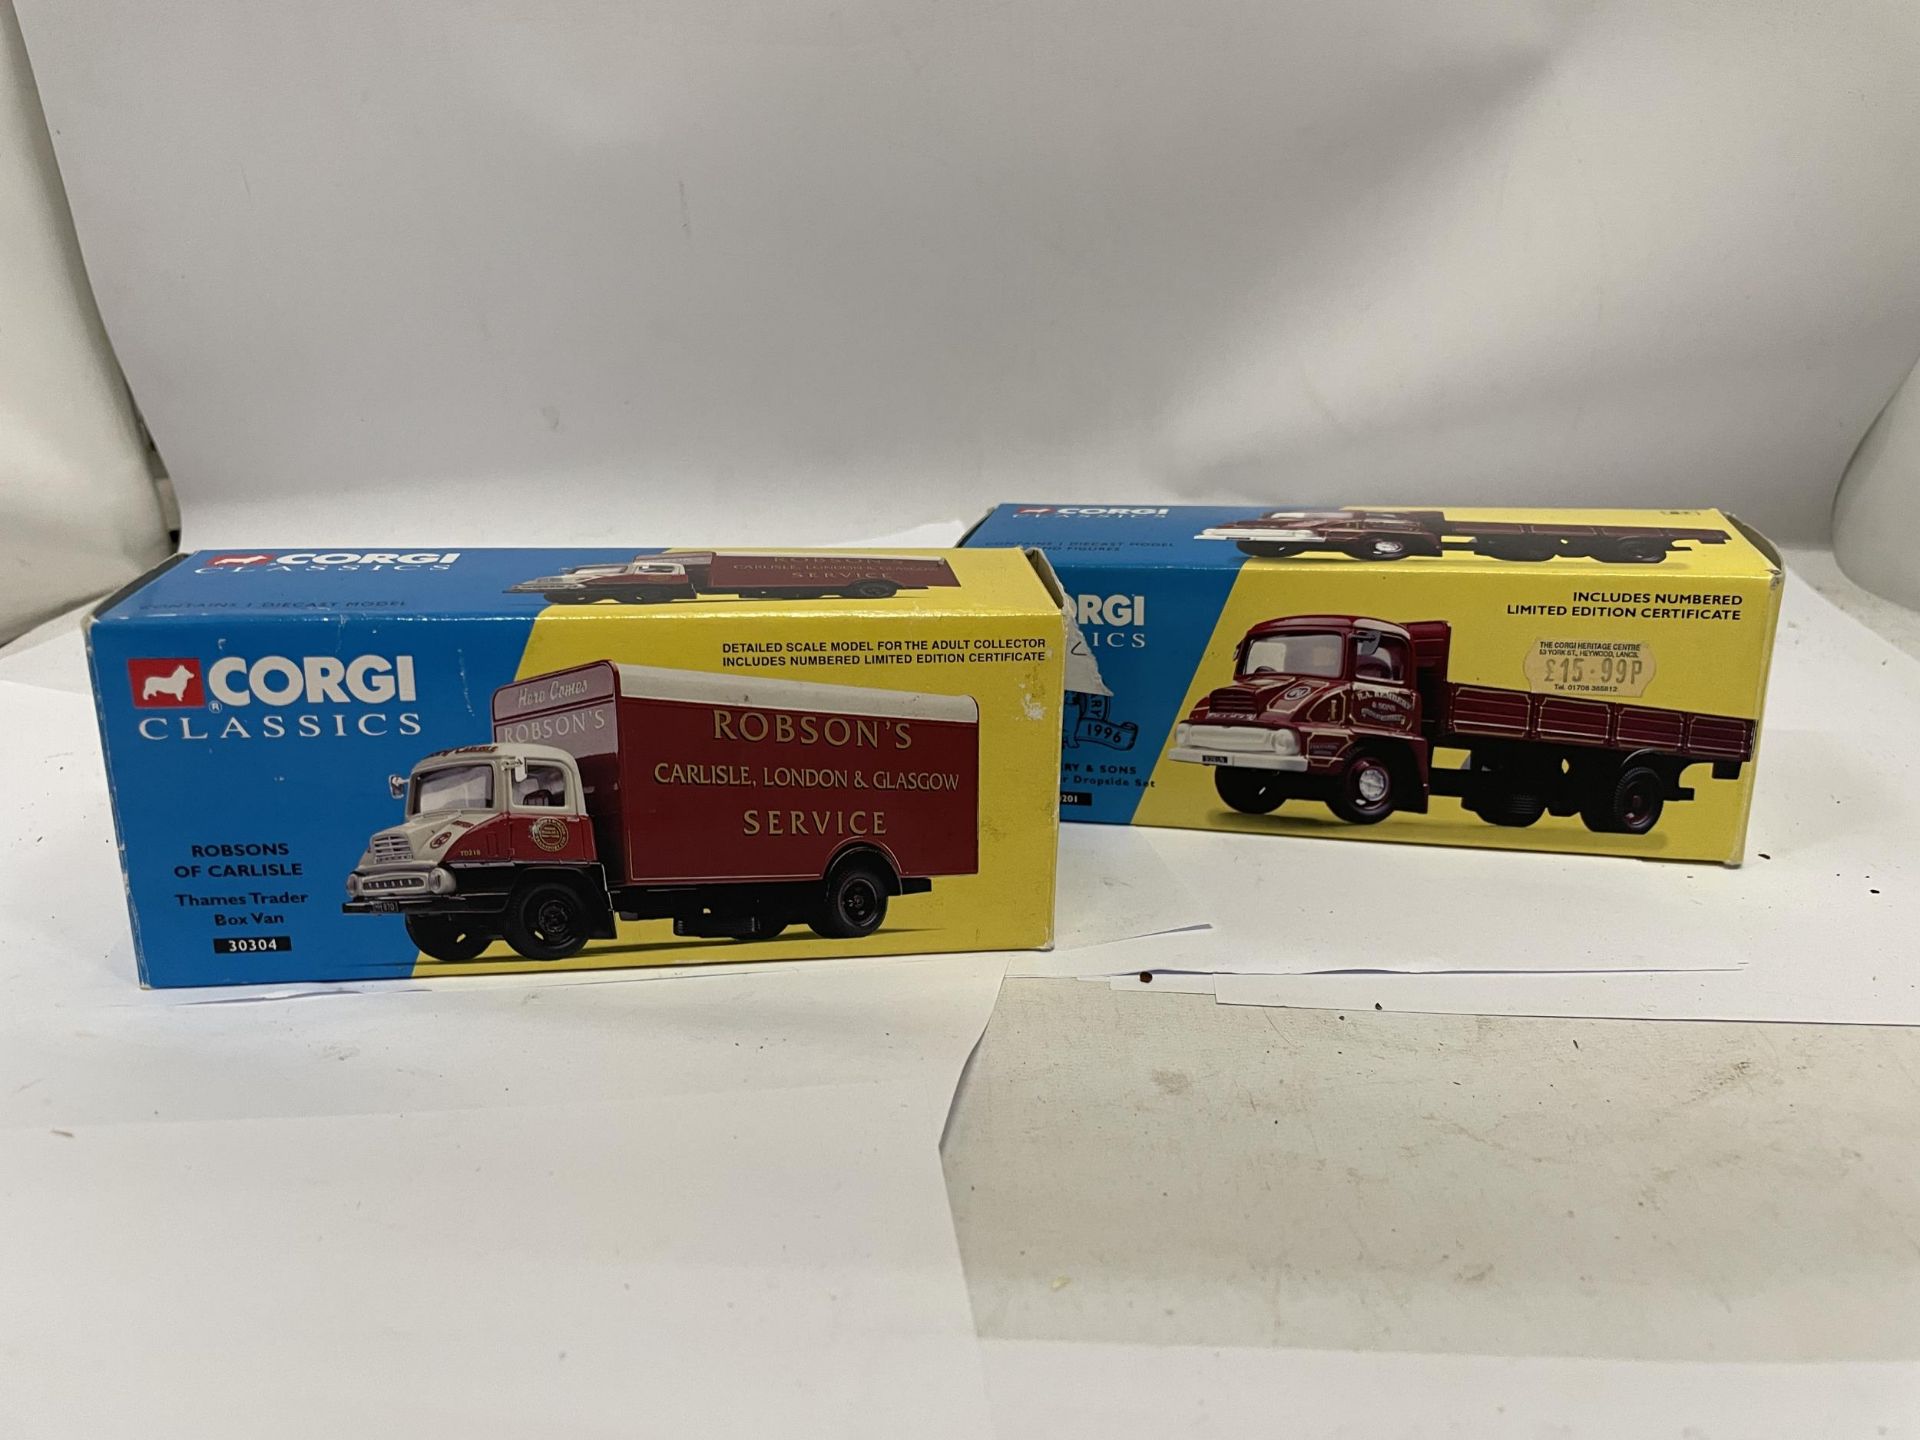 TWO CORGI CLASSICS TO INCLUDE A THAMES TRADER DROPSIDE SET NO. 30201 AND A ROBSONS OF CARLISLE